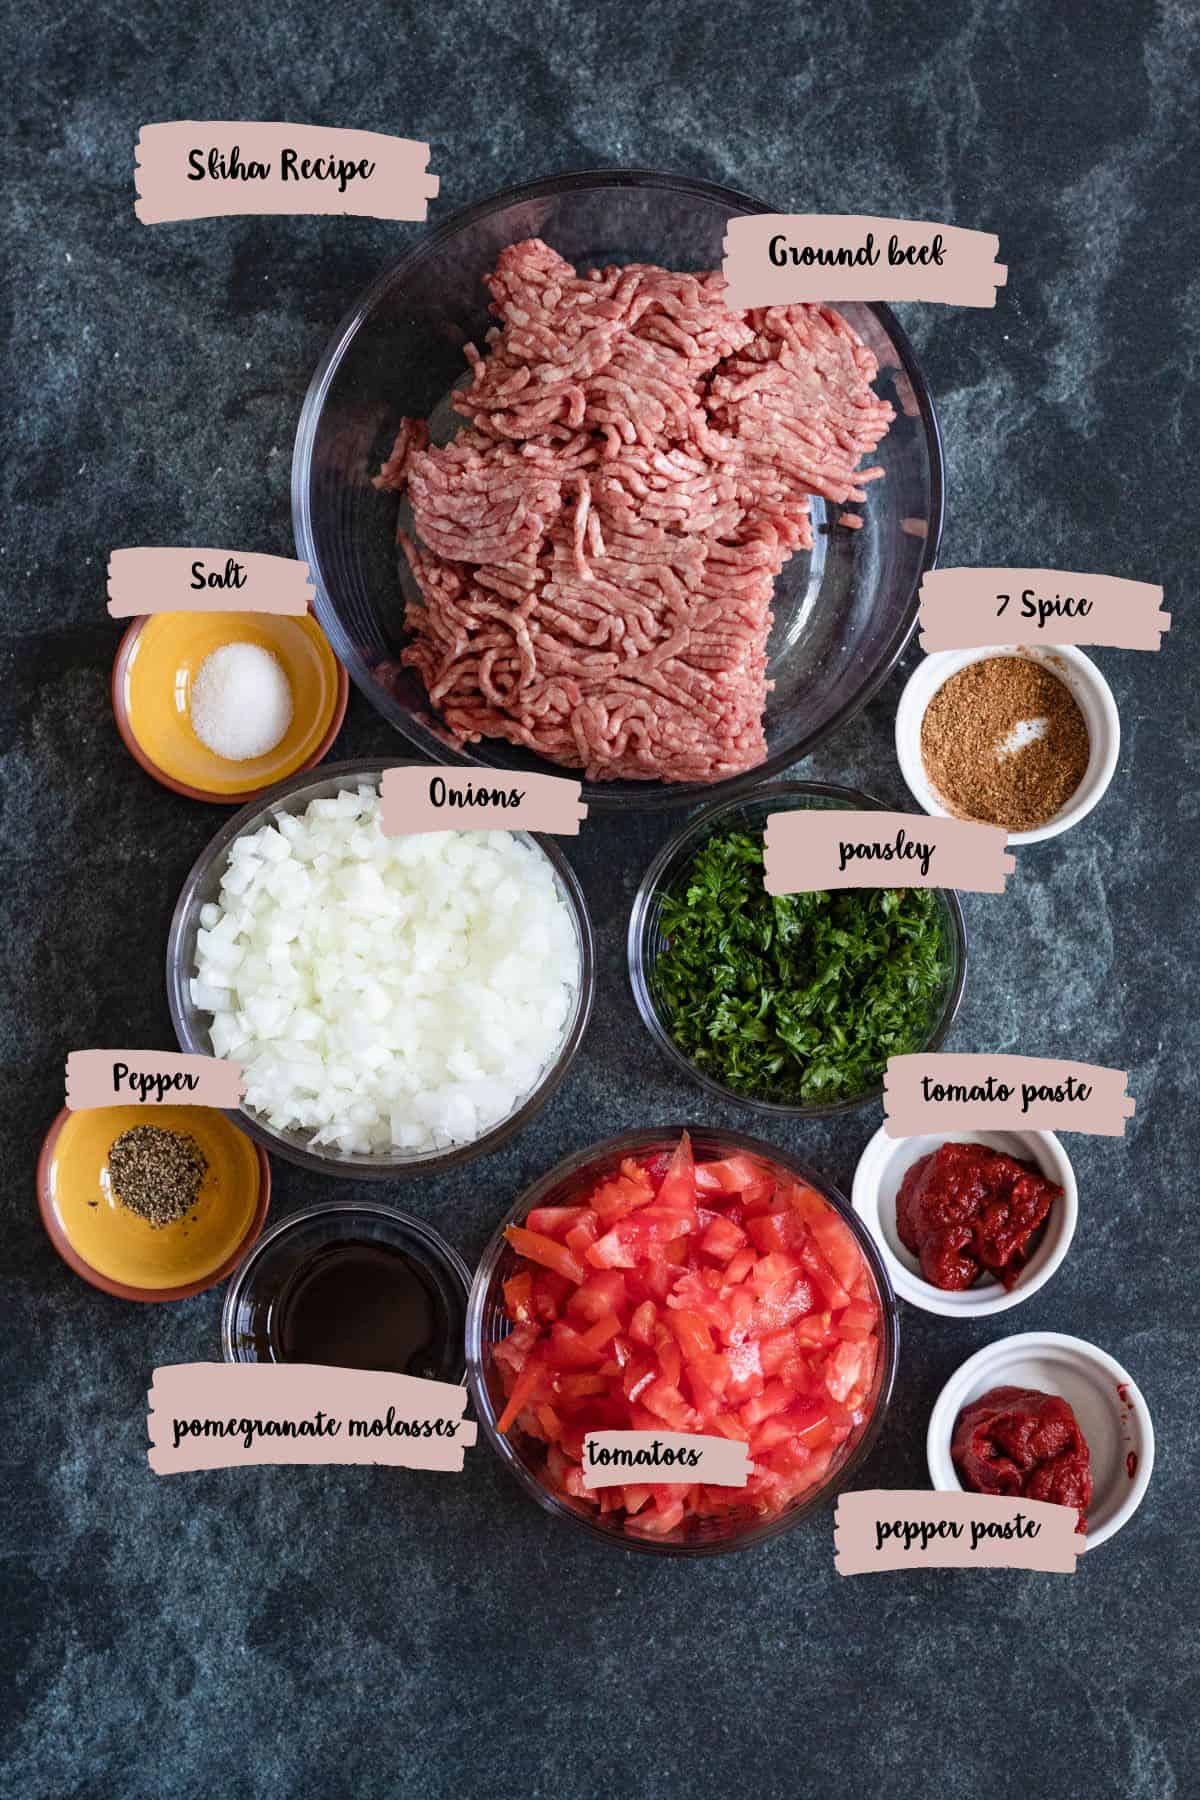 Ingredients needed to prepare the filling for sfiha recipe. 